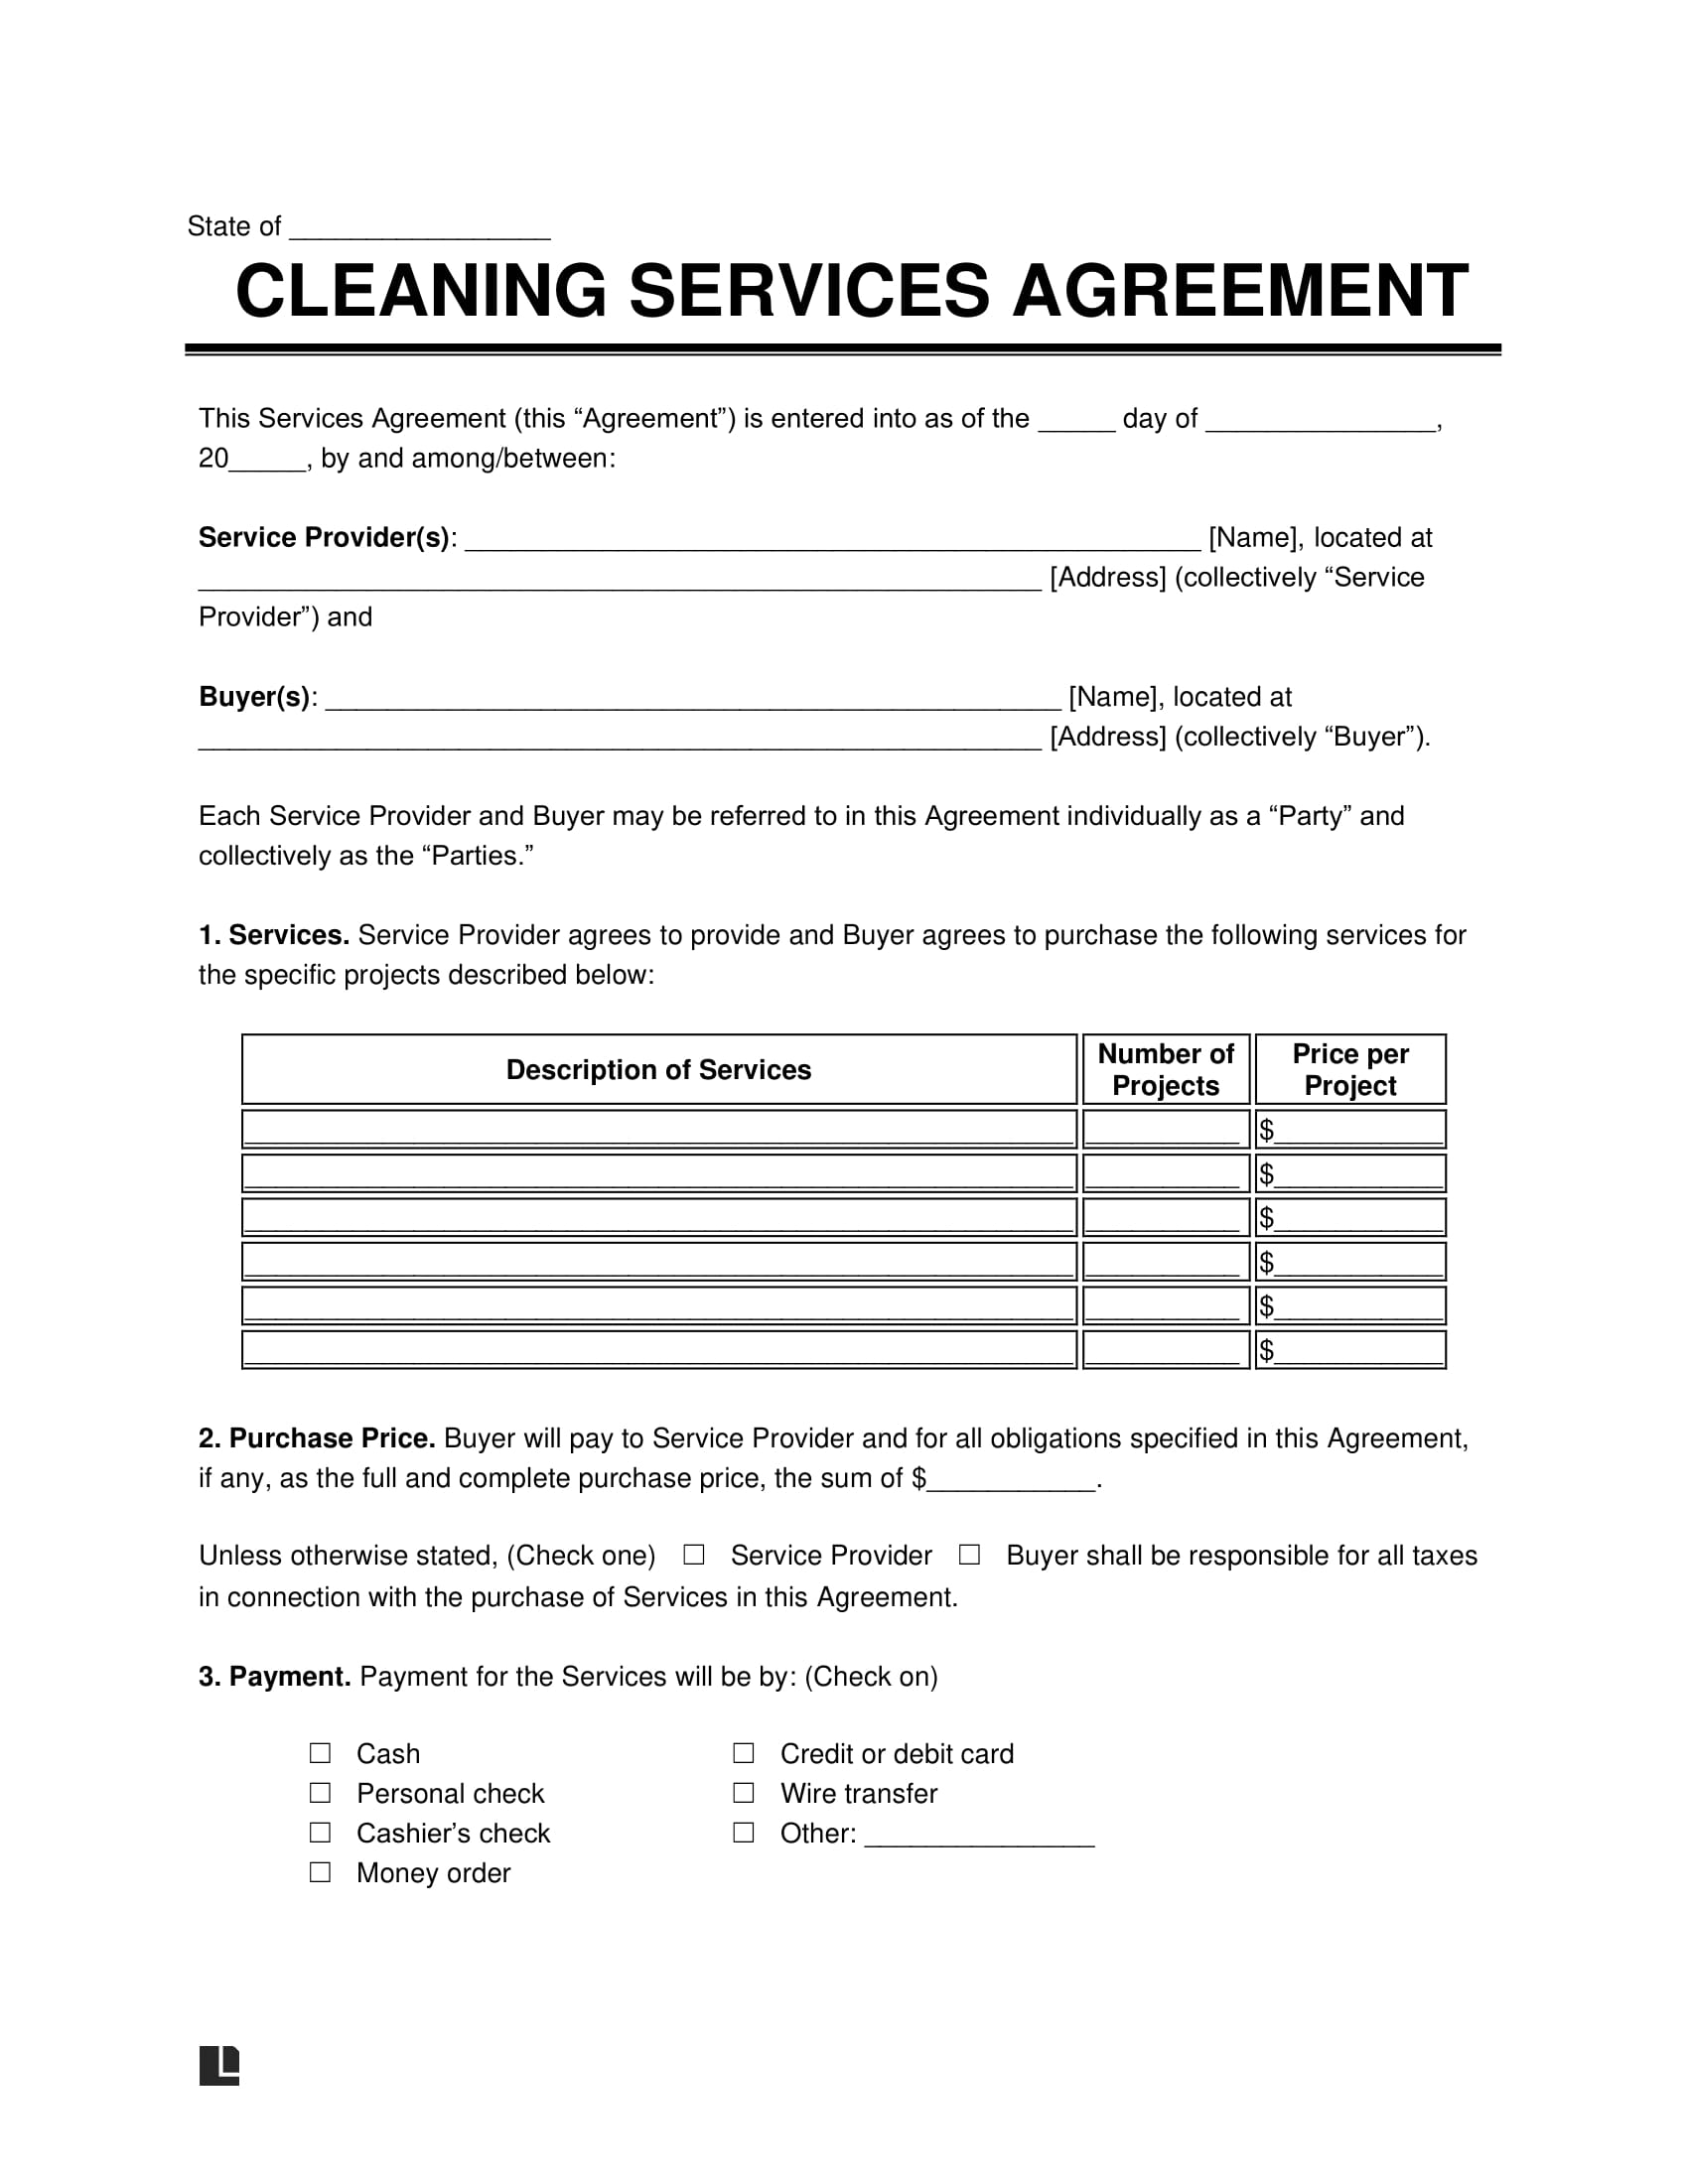 cleaning contract screenshot